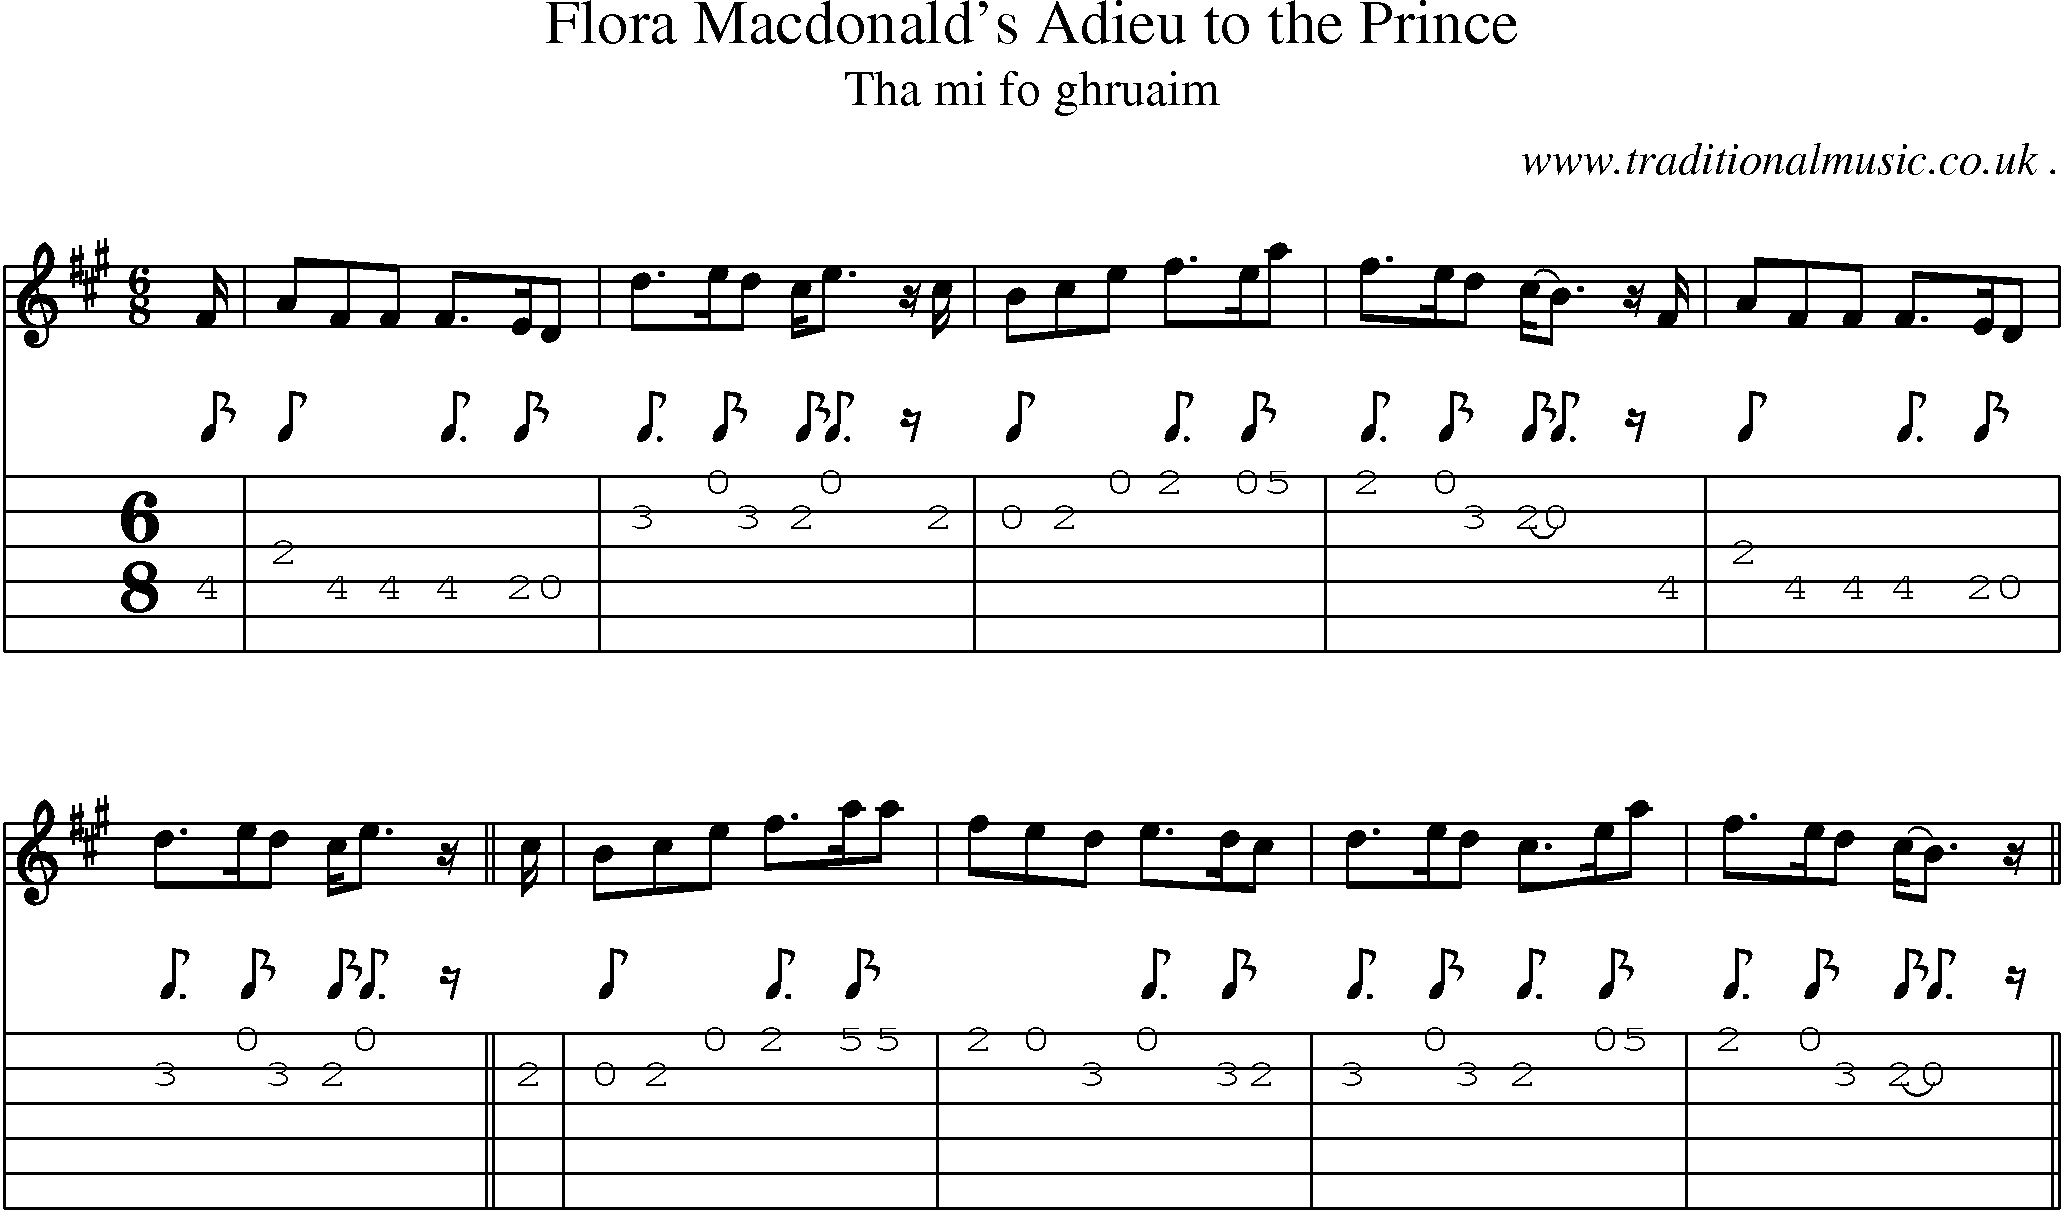 Sheet-music  score, Chords and Guitar Tabs for Flora Macdonalds Adieu To The Prince